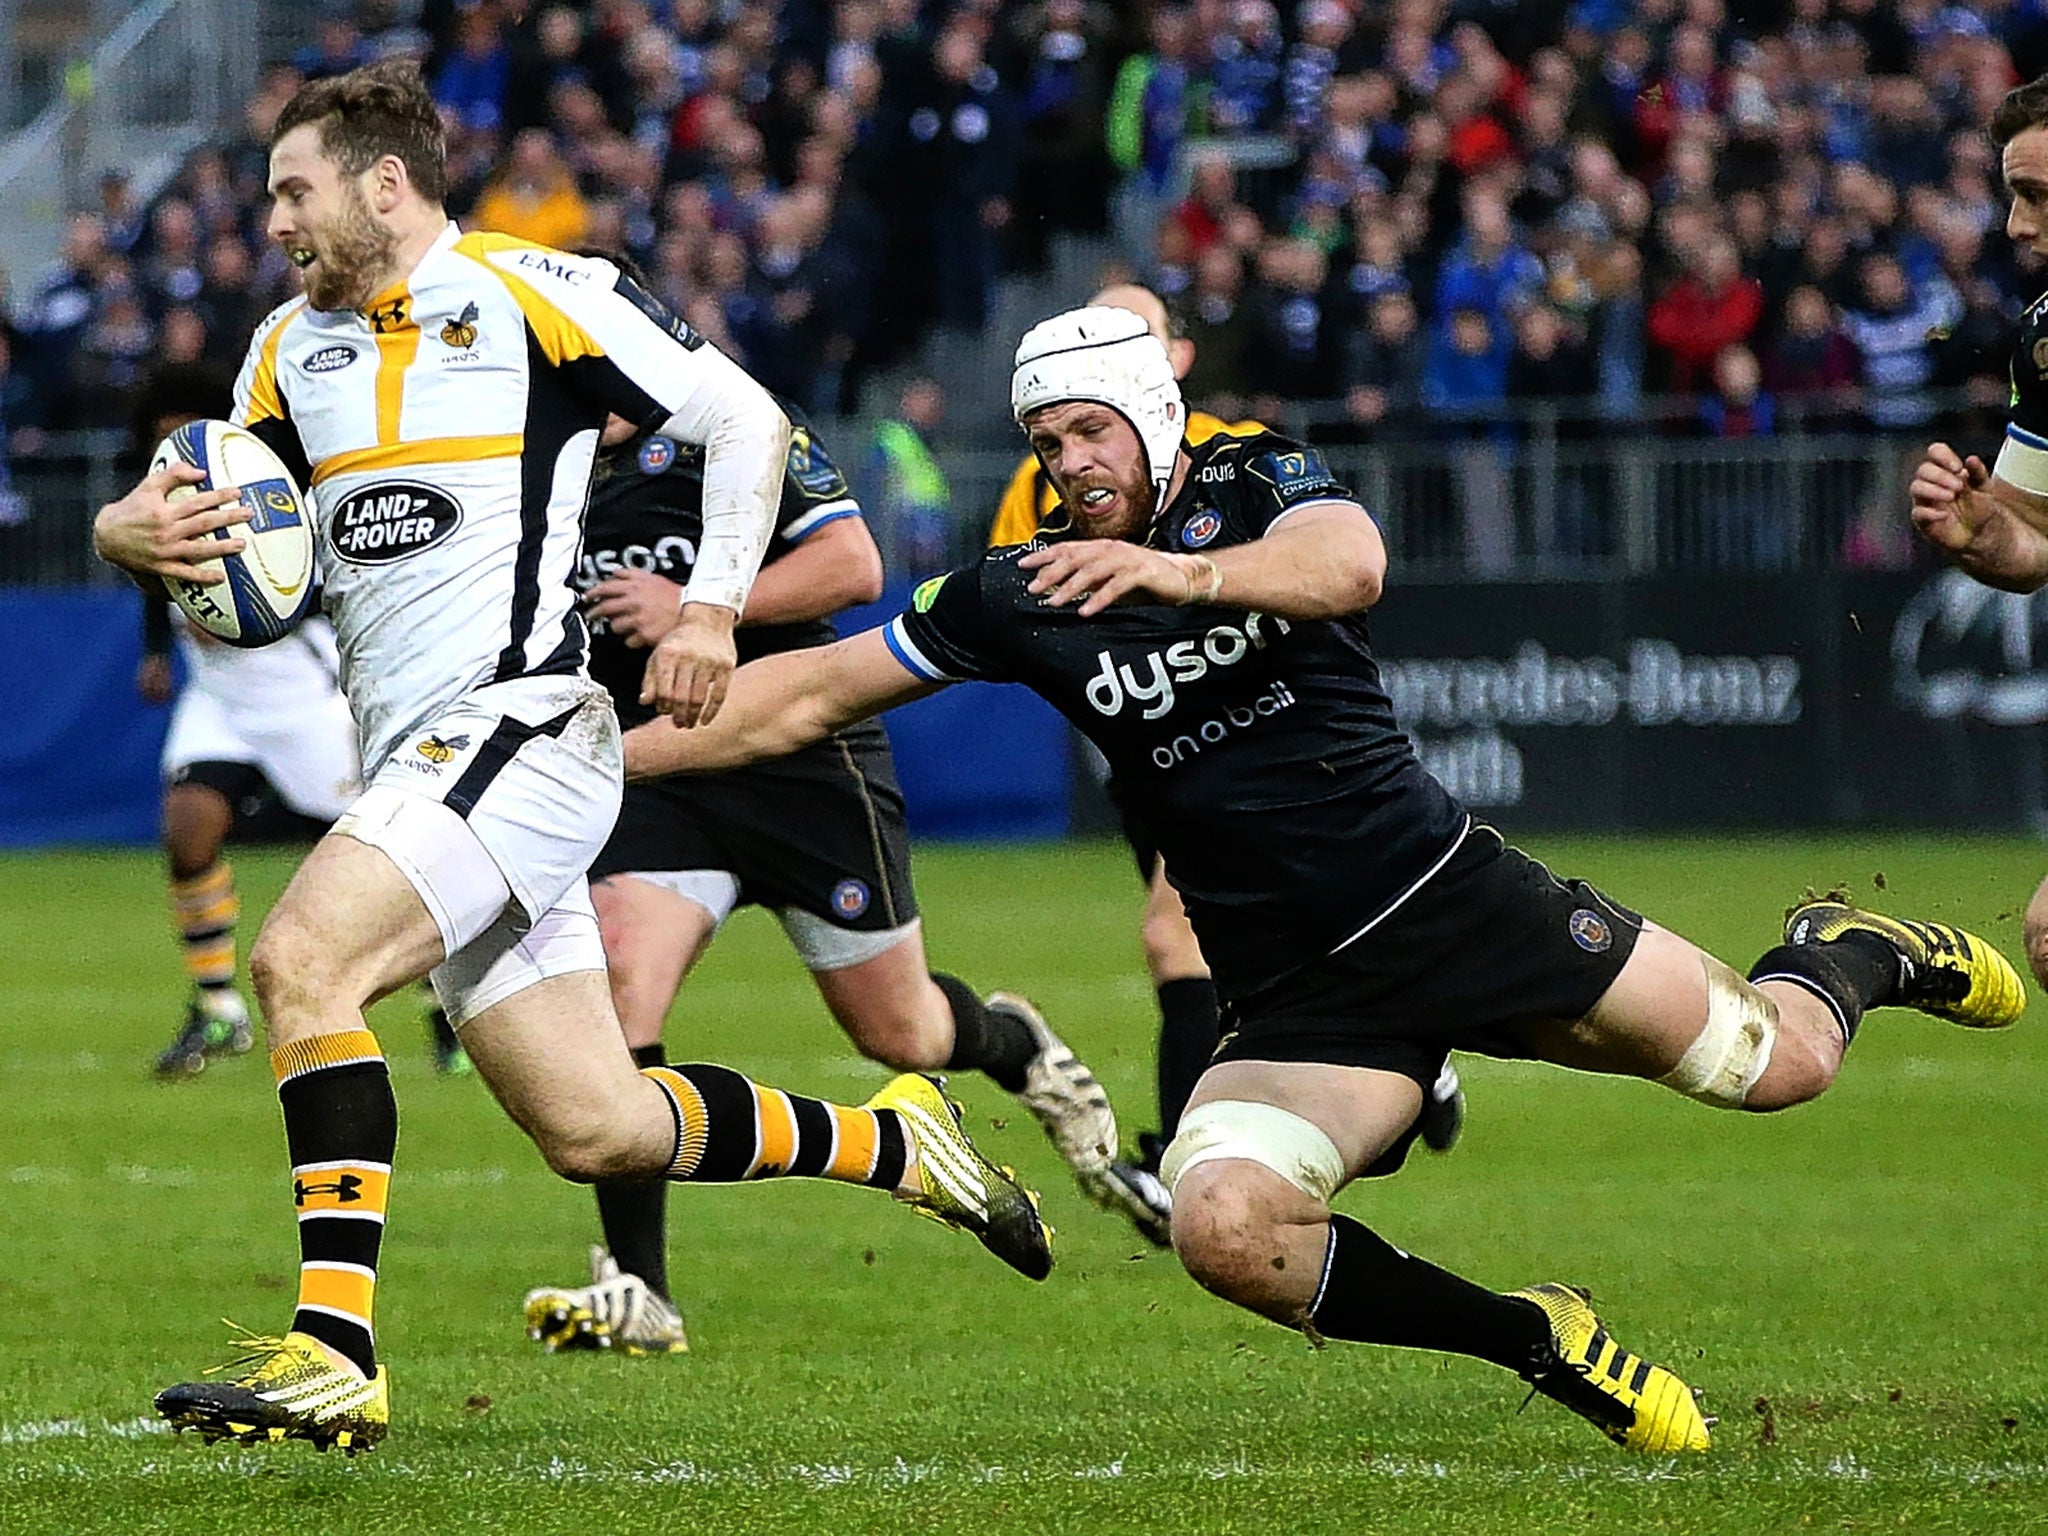 Elliot Daly pulls away from Dave Attwood’s attempted tackle to score for Wasps